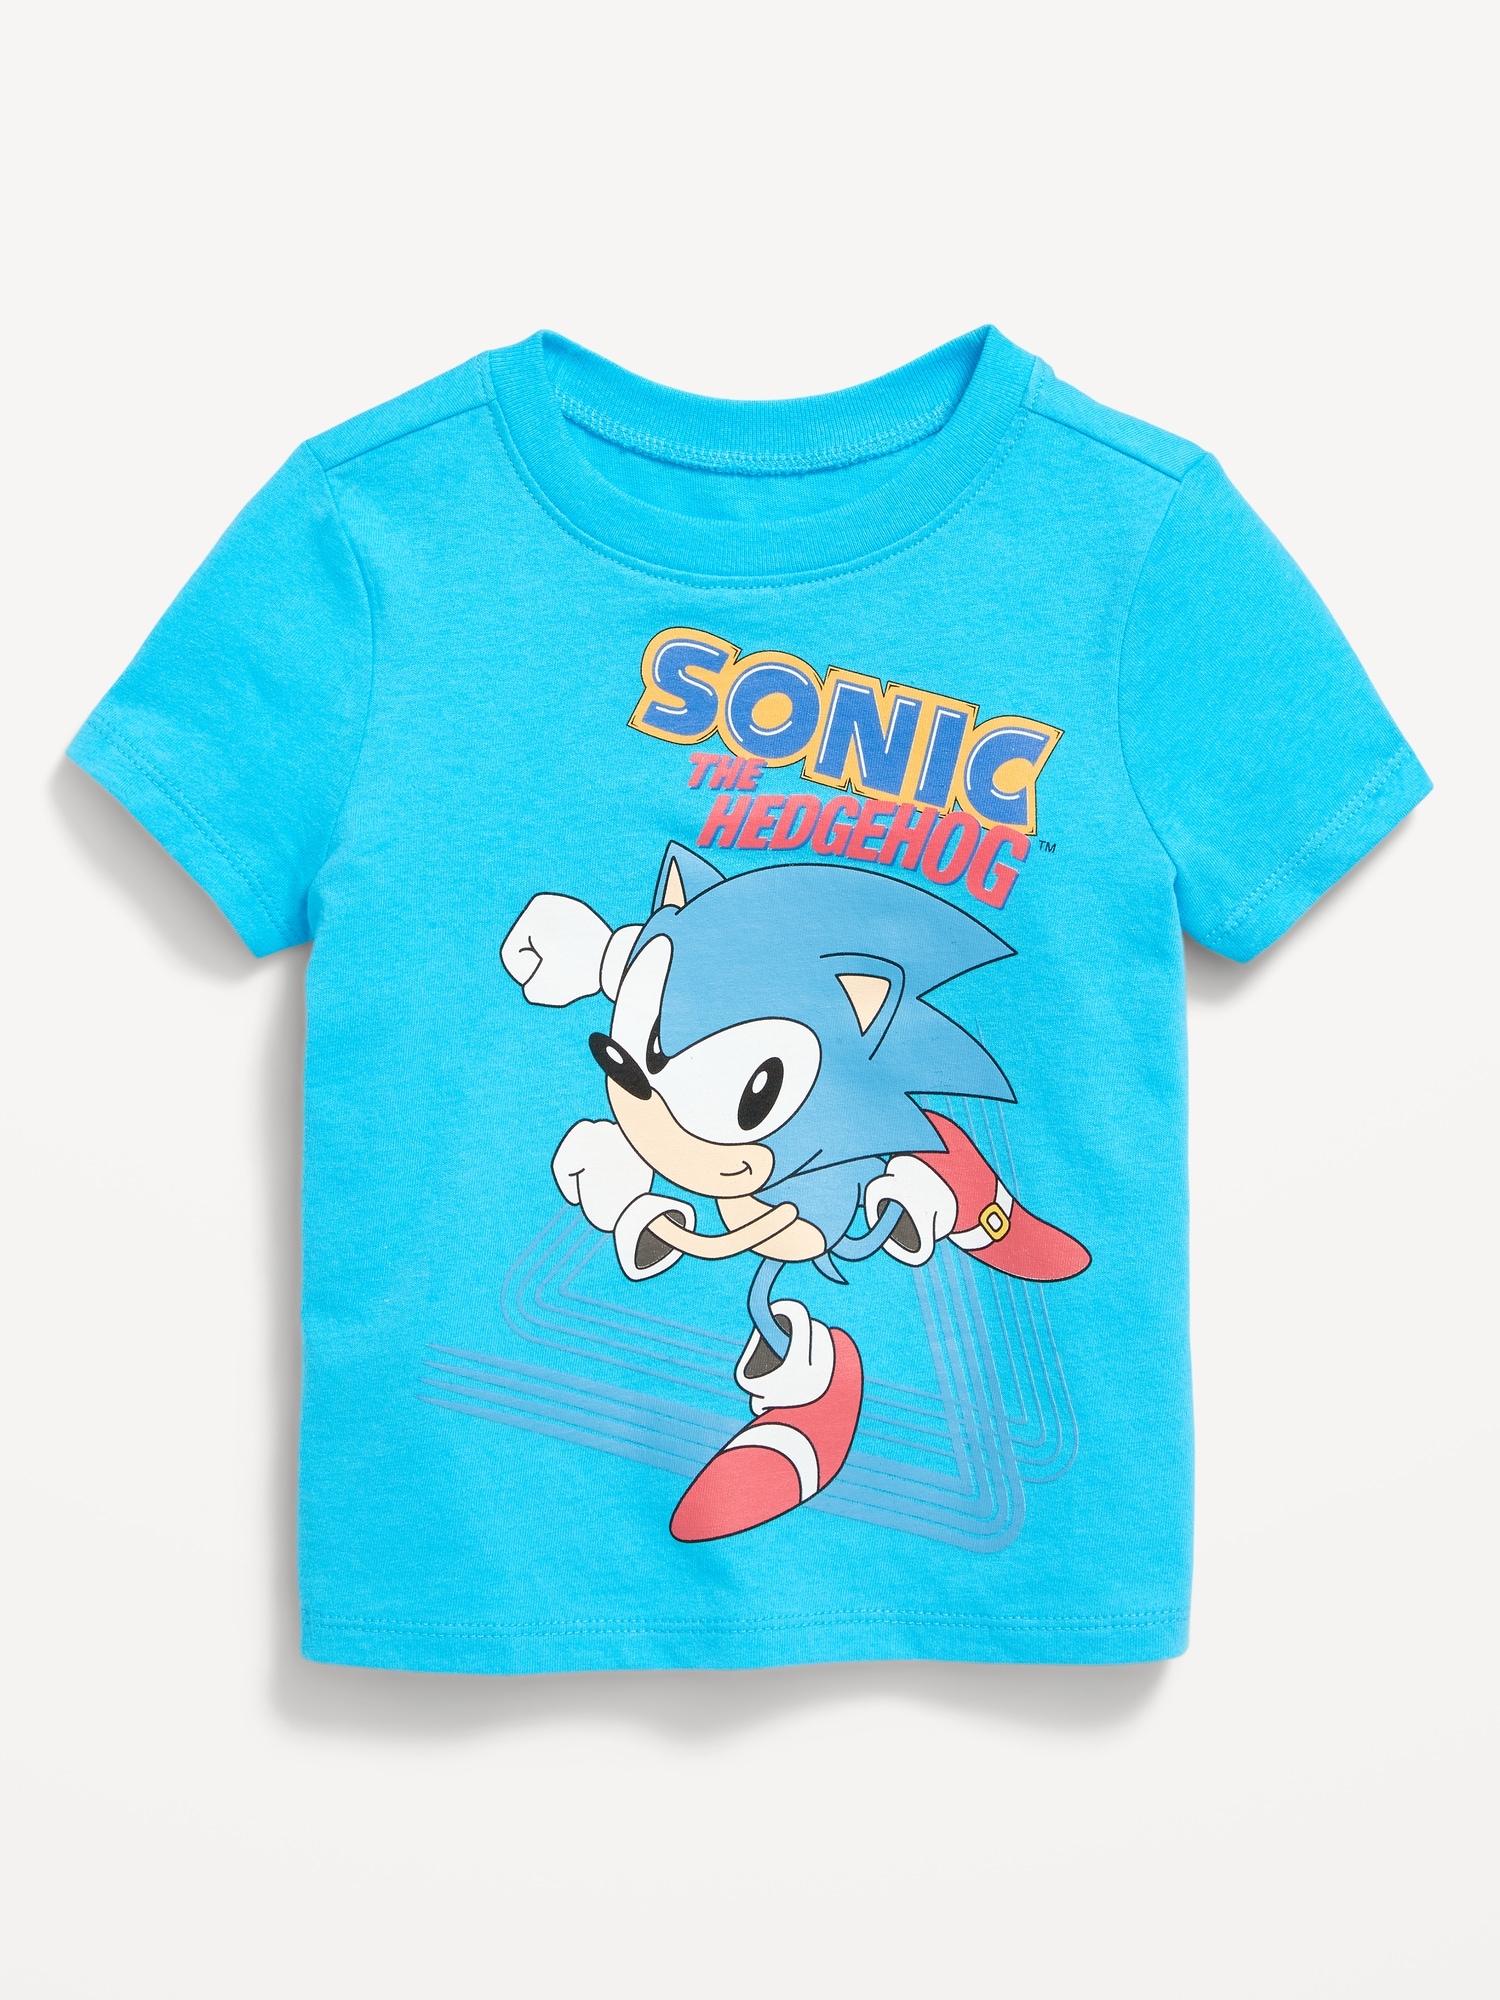 Old Navy Gender-Neutral Sonic The Hedgehog Graphic T-Shirt for